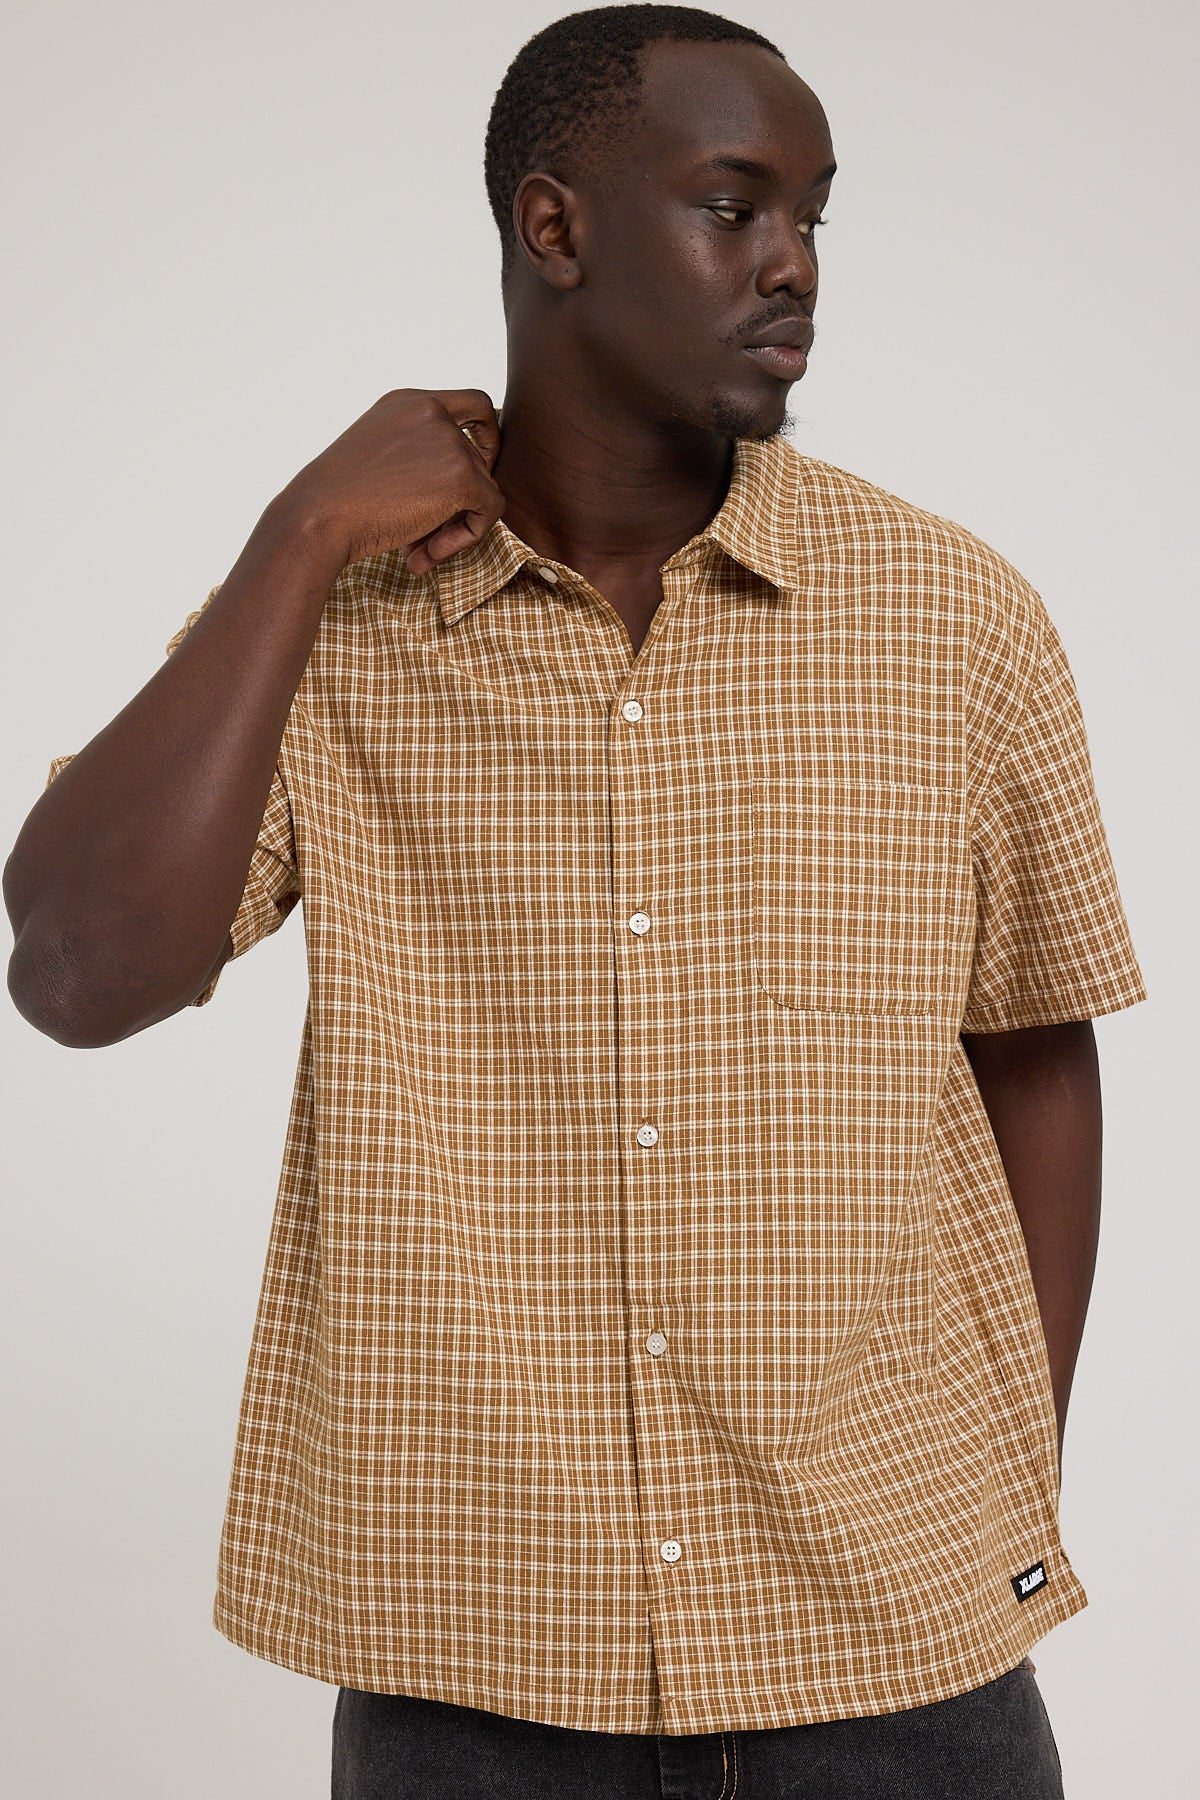 Xlarge Tommy Check SS Shirt Brown